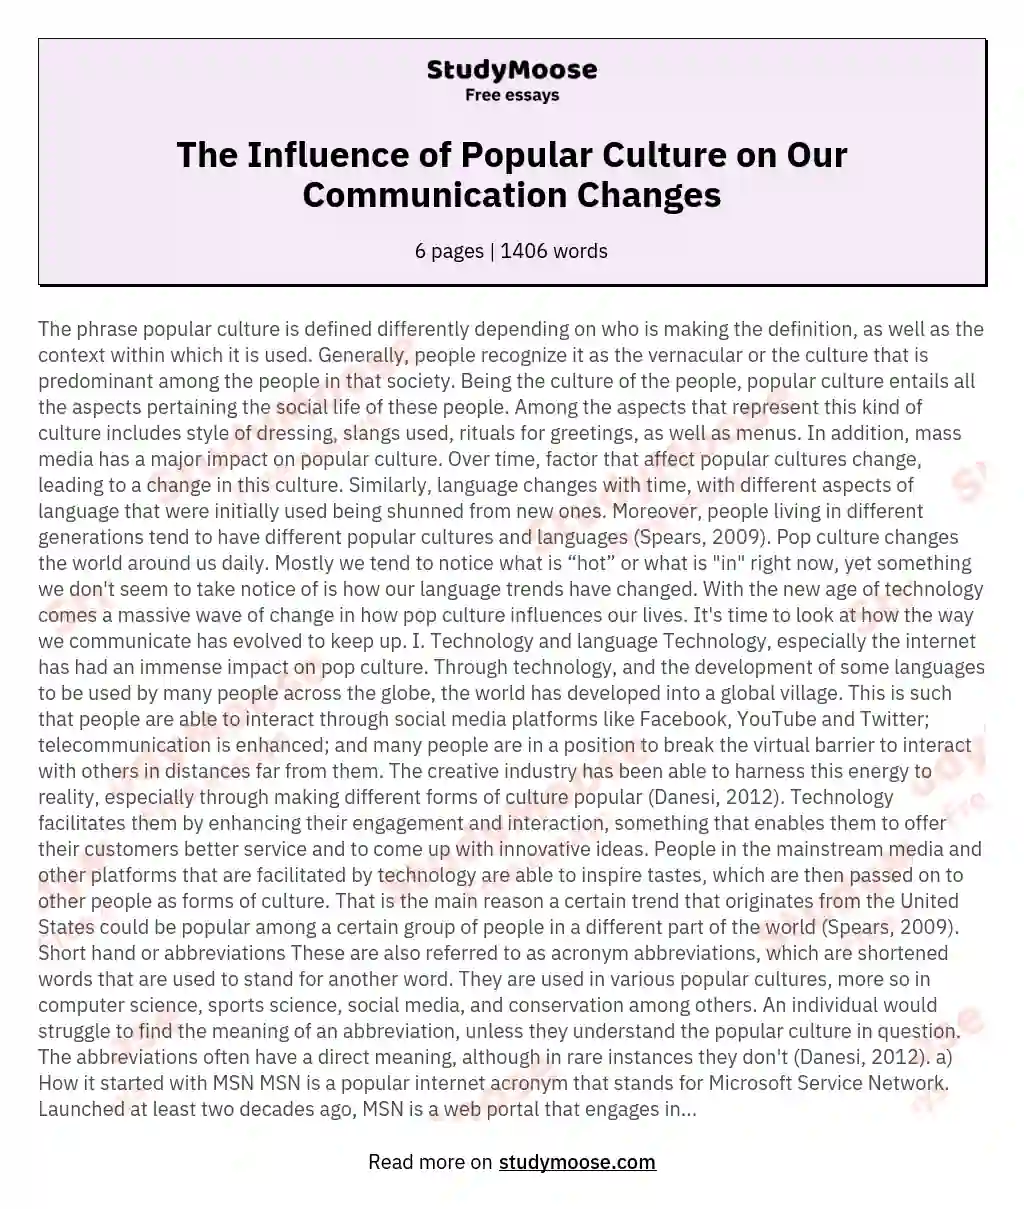 The Influence of Popular Culture on Our Communication Changes essay